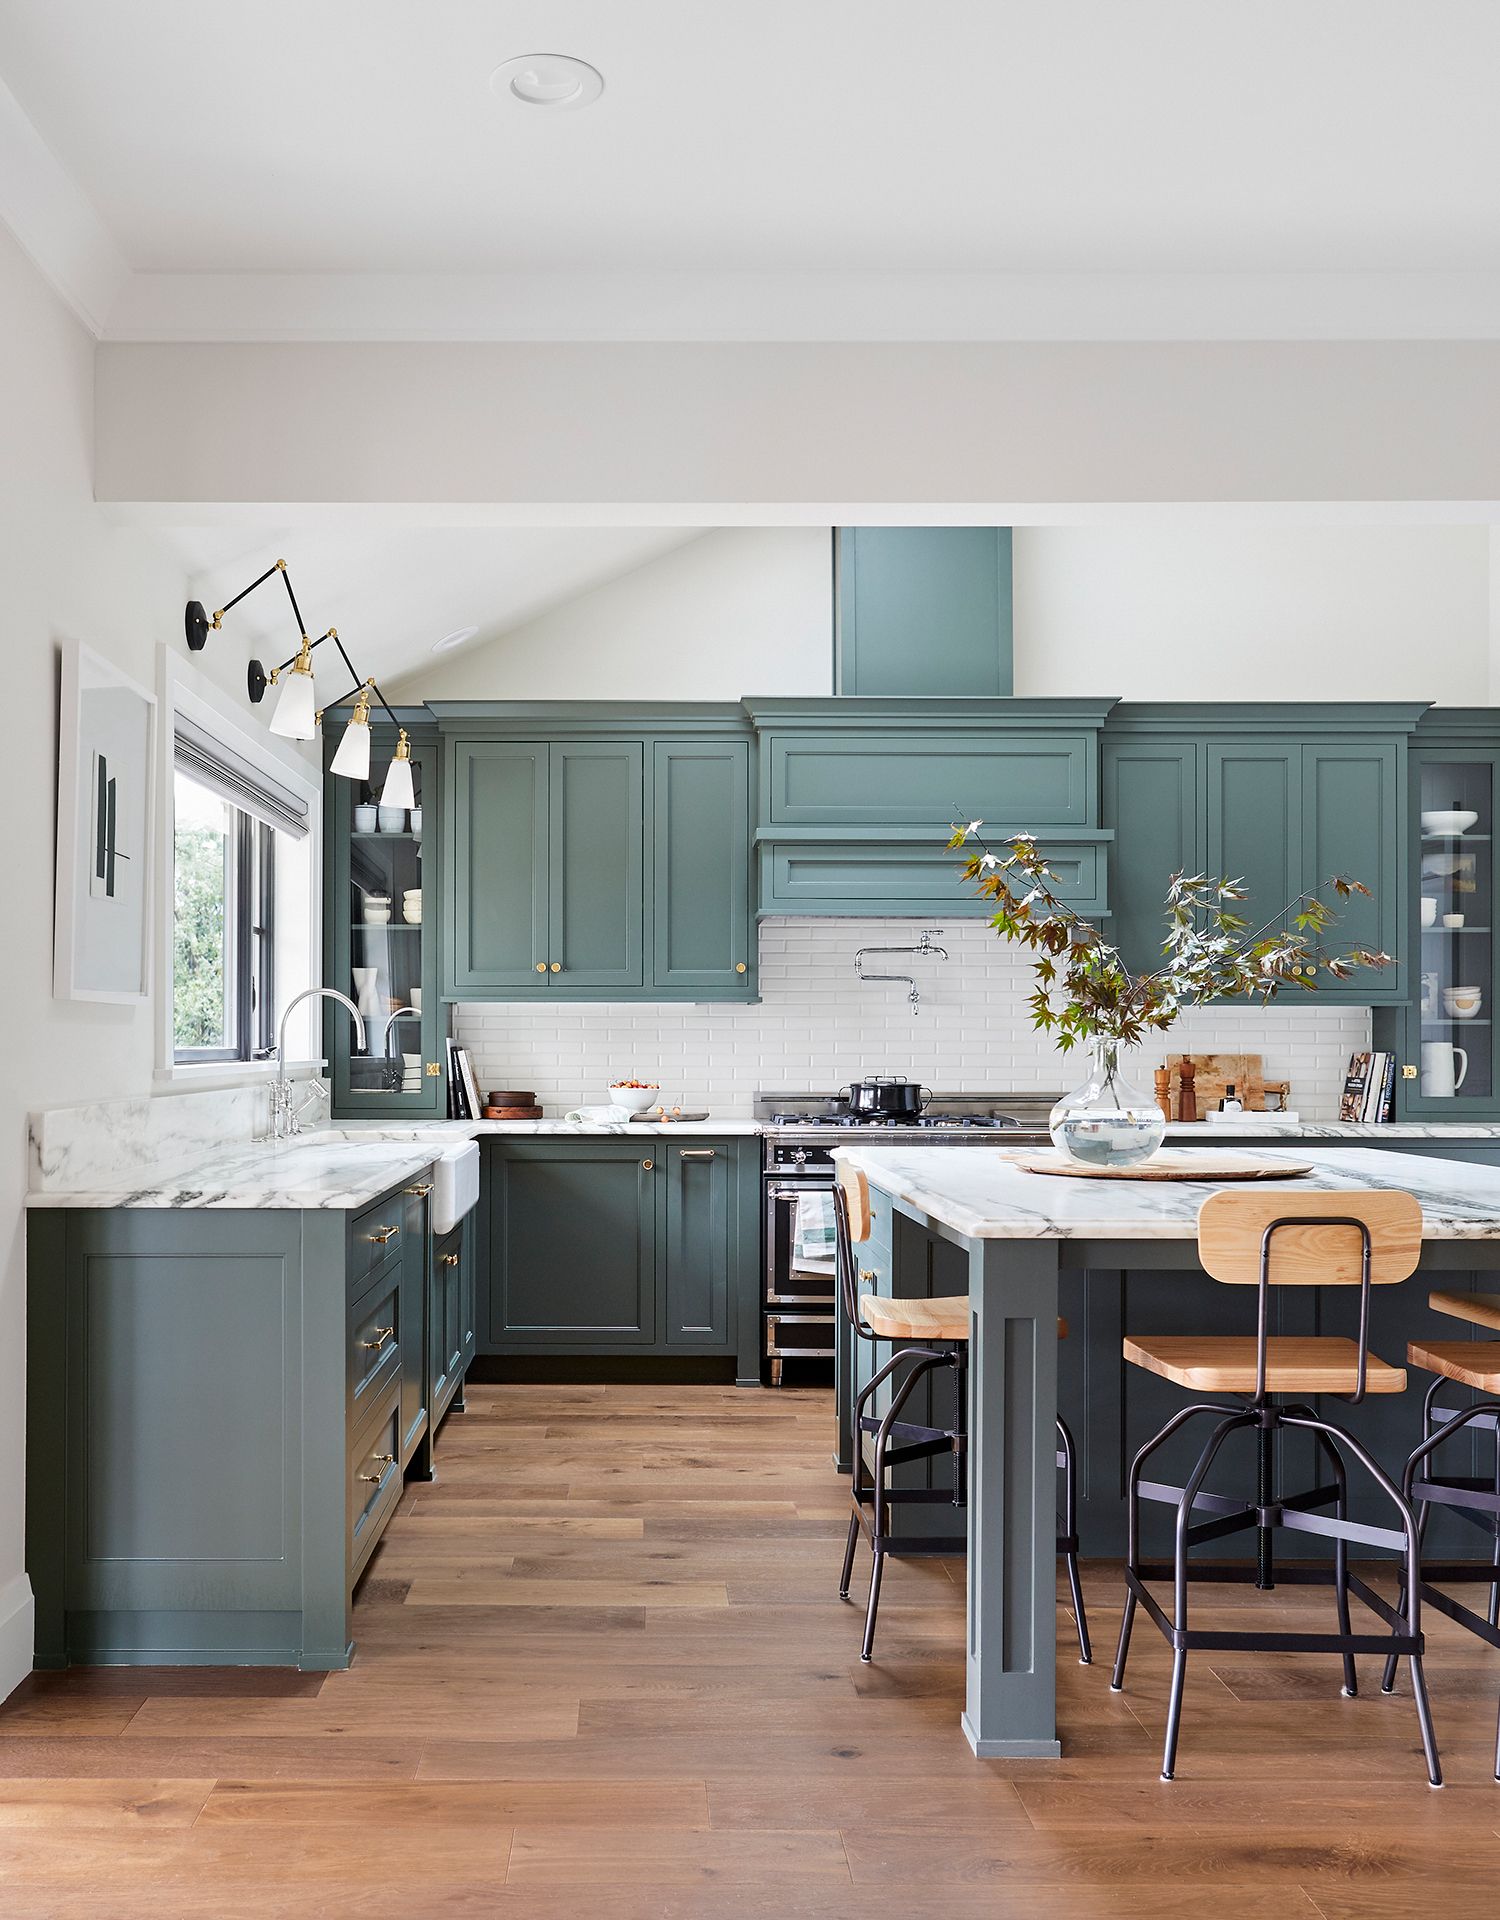 Kitchen Cabinet Paint Colors For 2020, What Color Kitchen Cabinets Are Most Popular Now